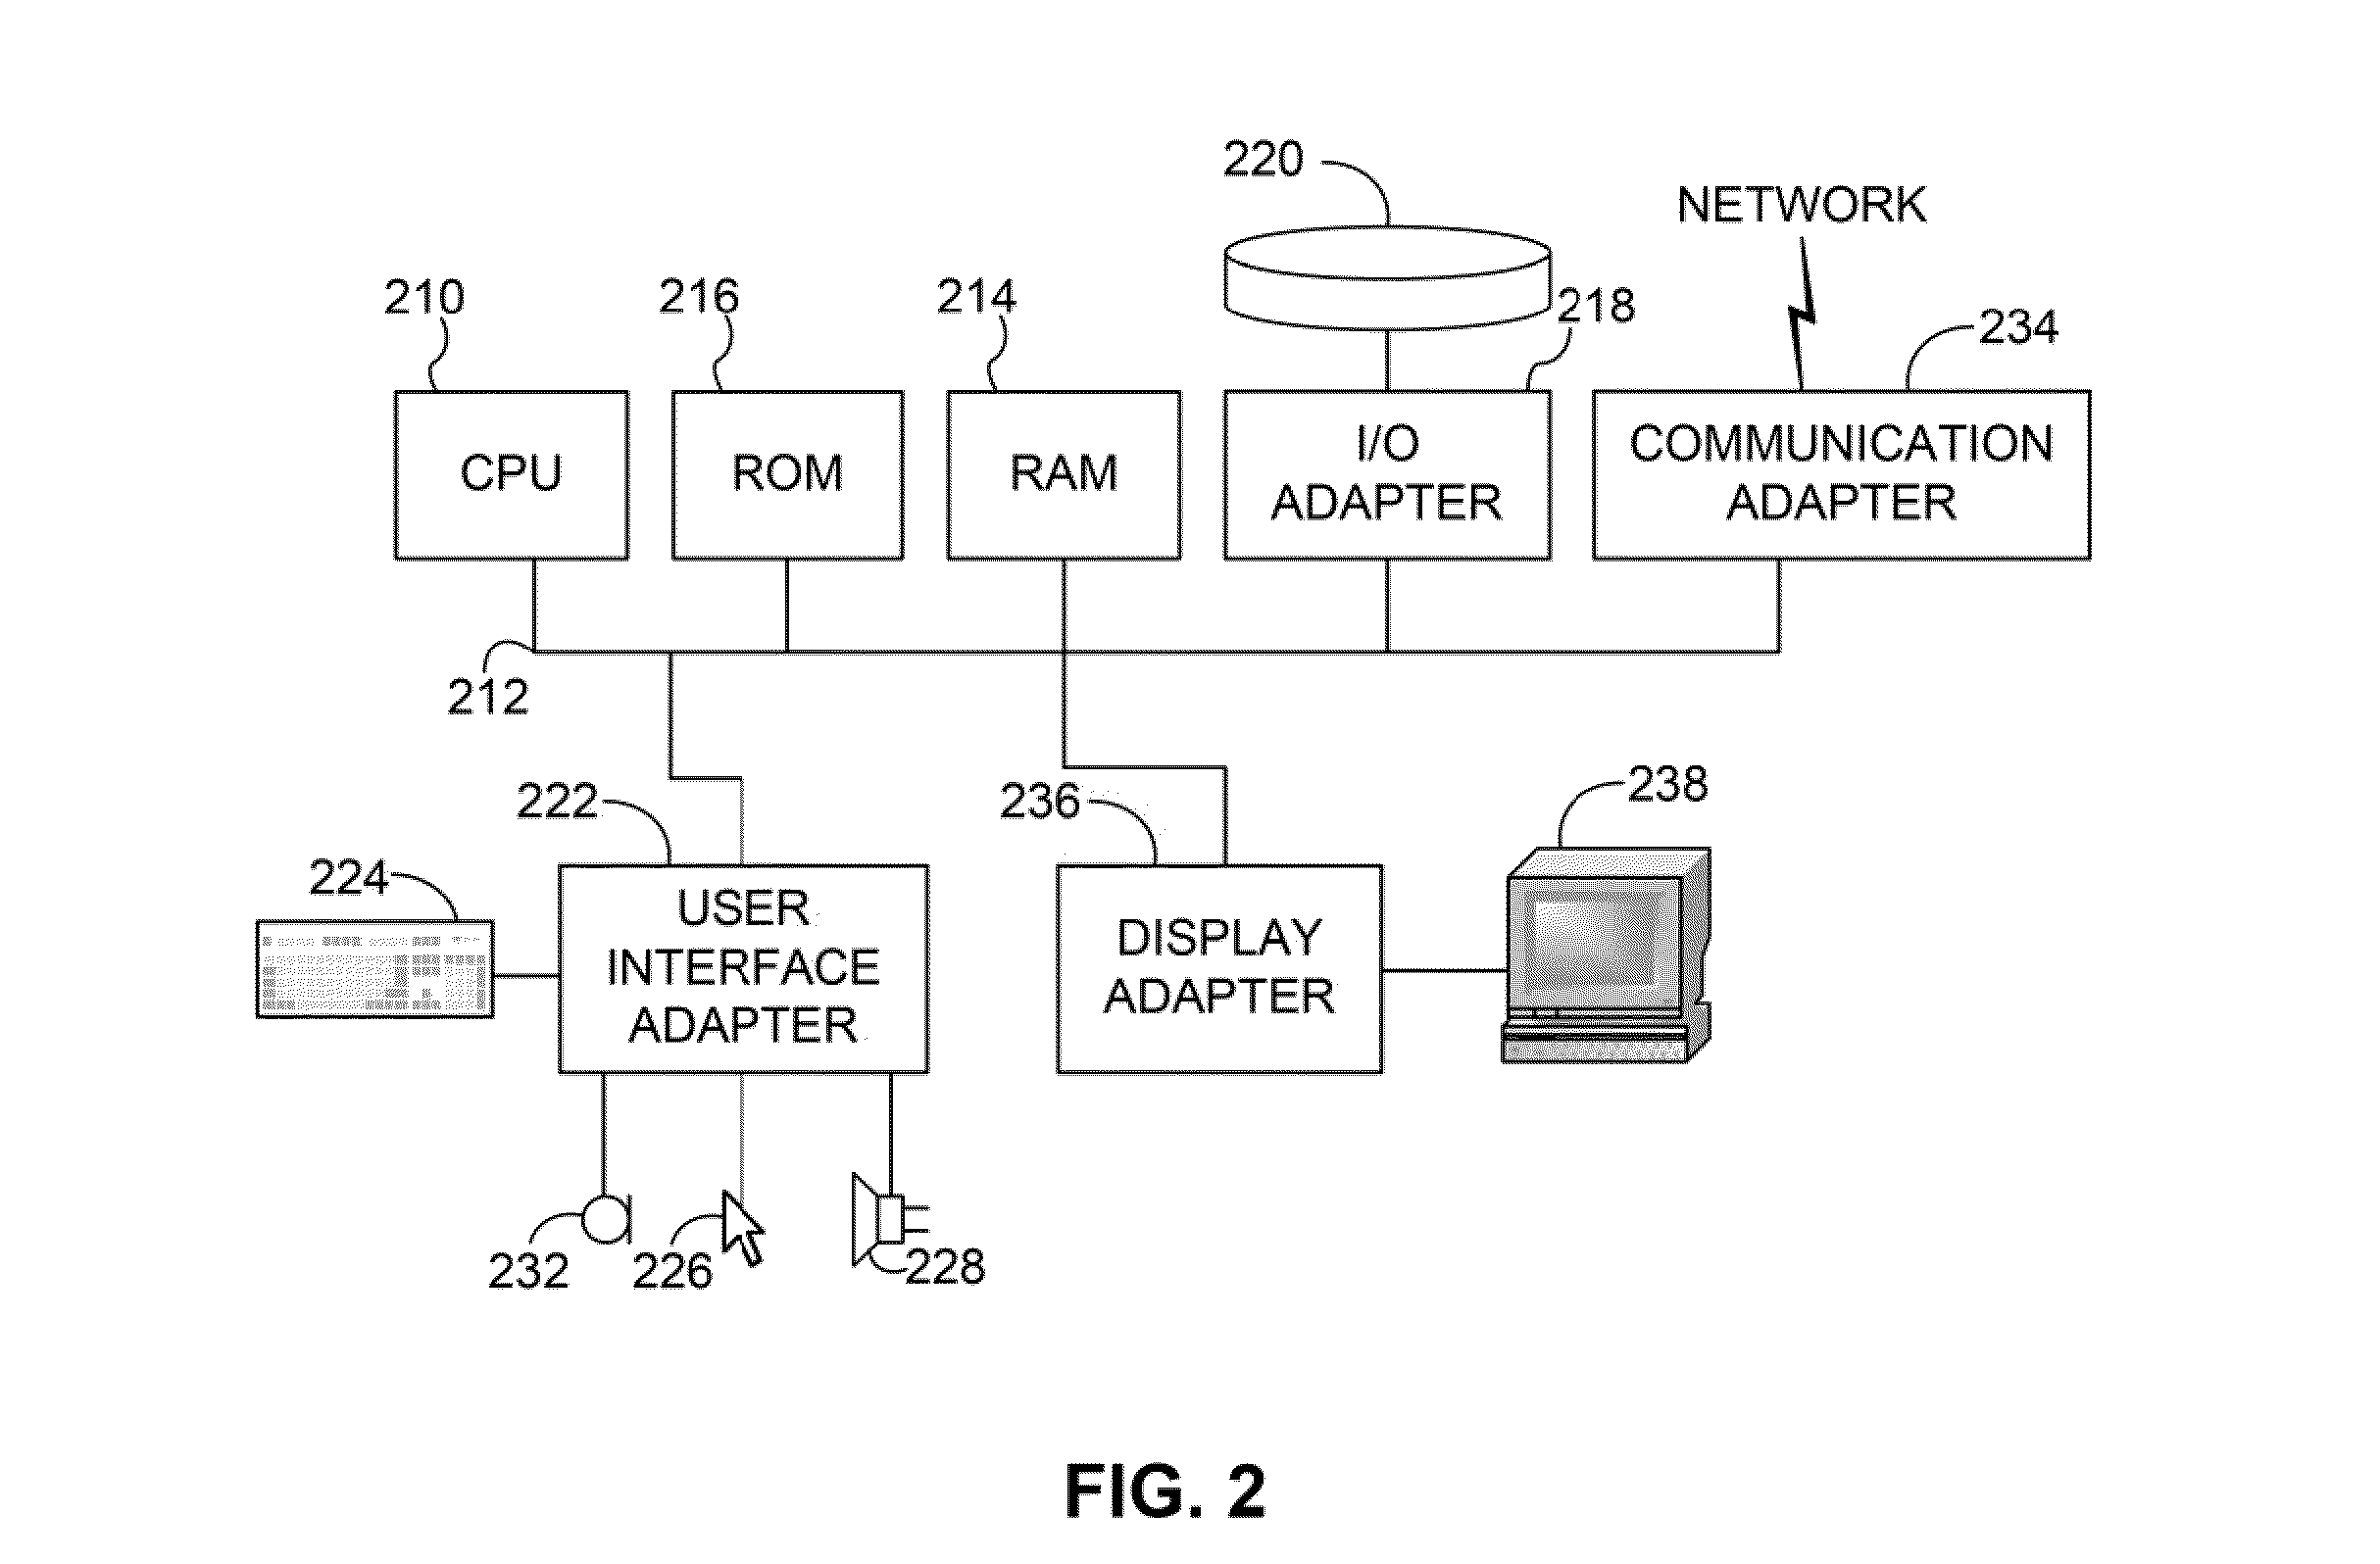 Primary storage media with associated secondary storage media for efficient data management